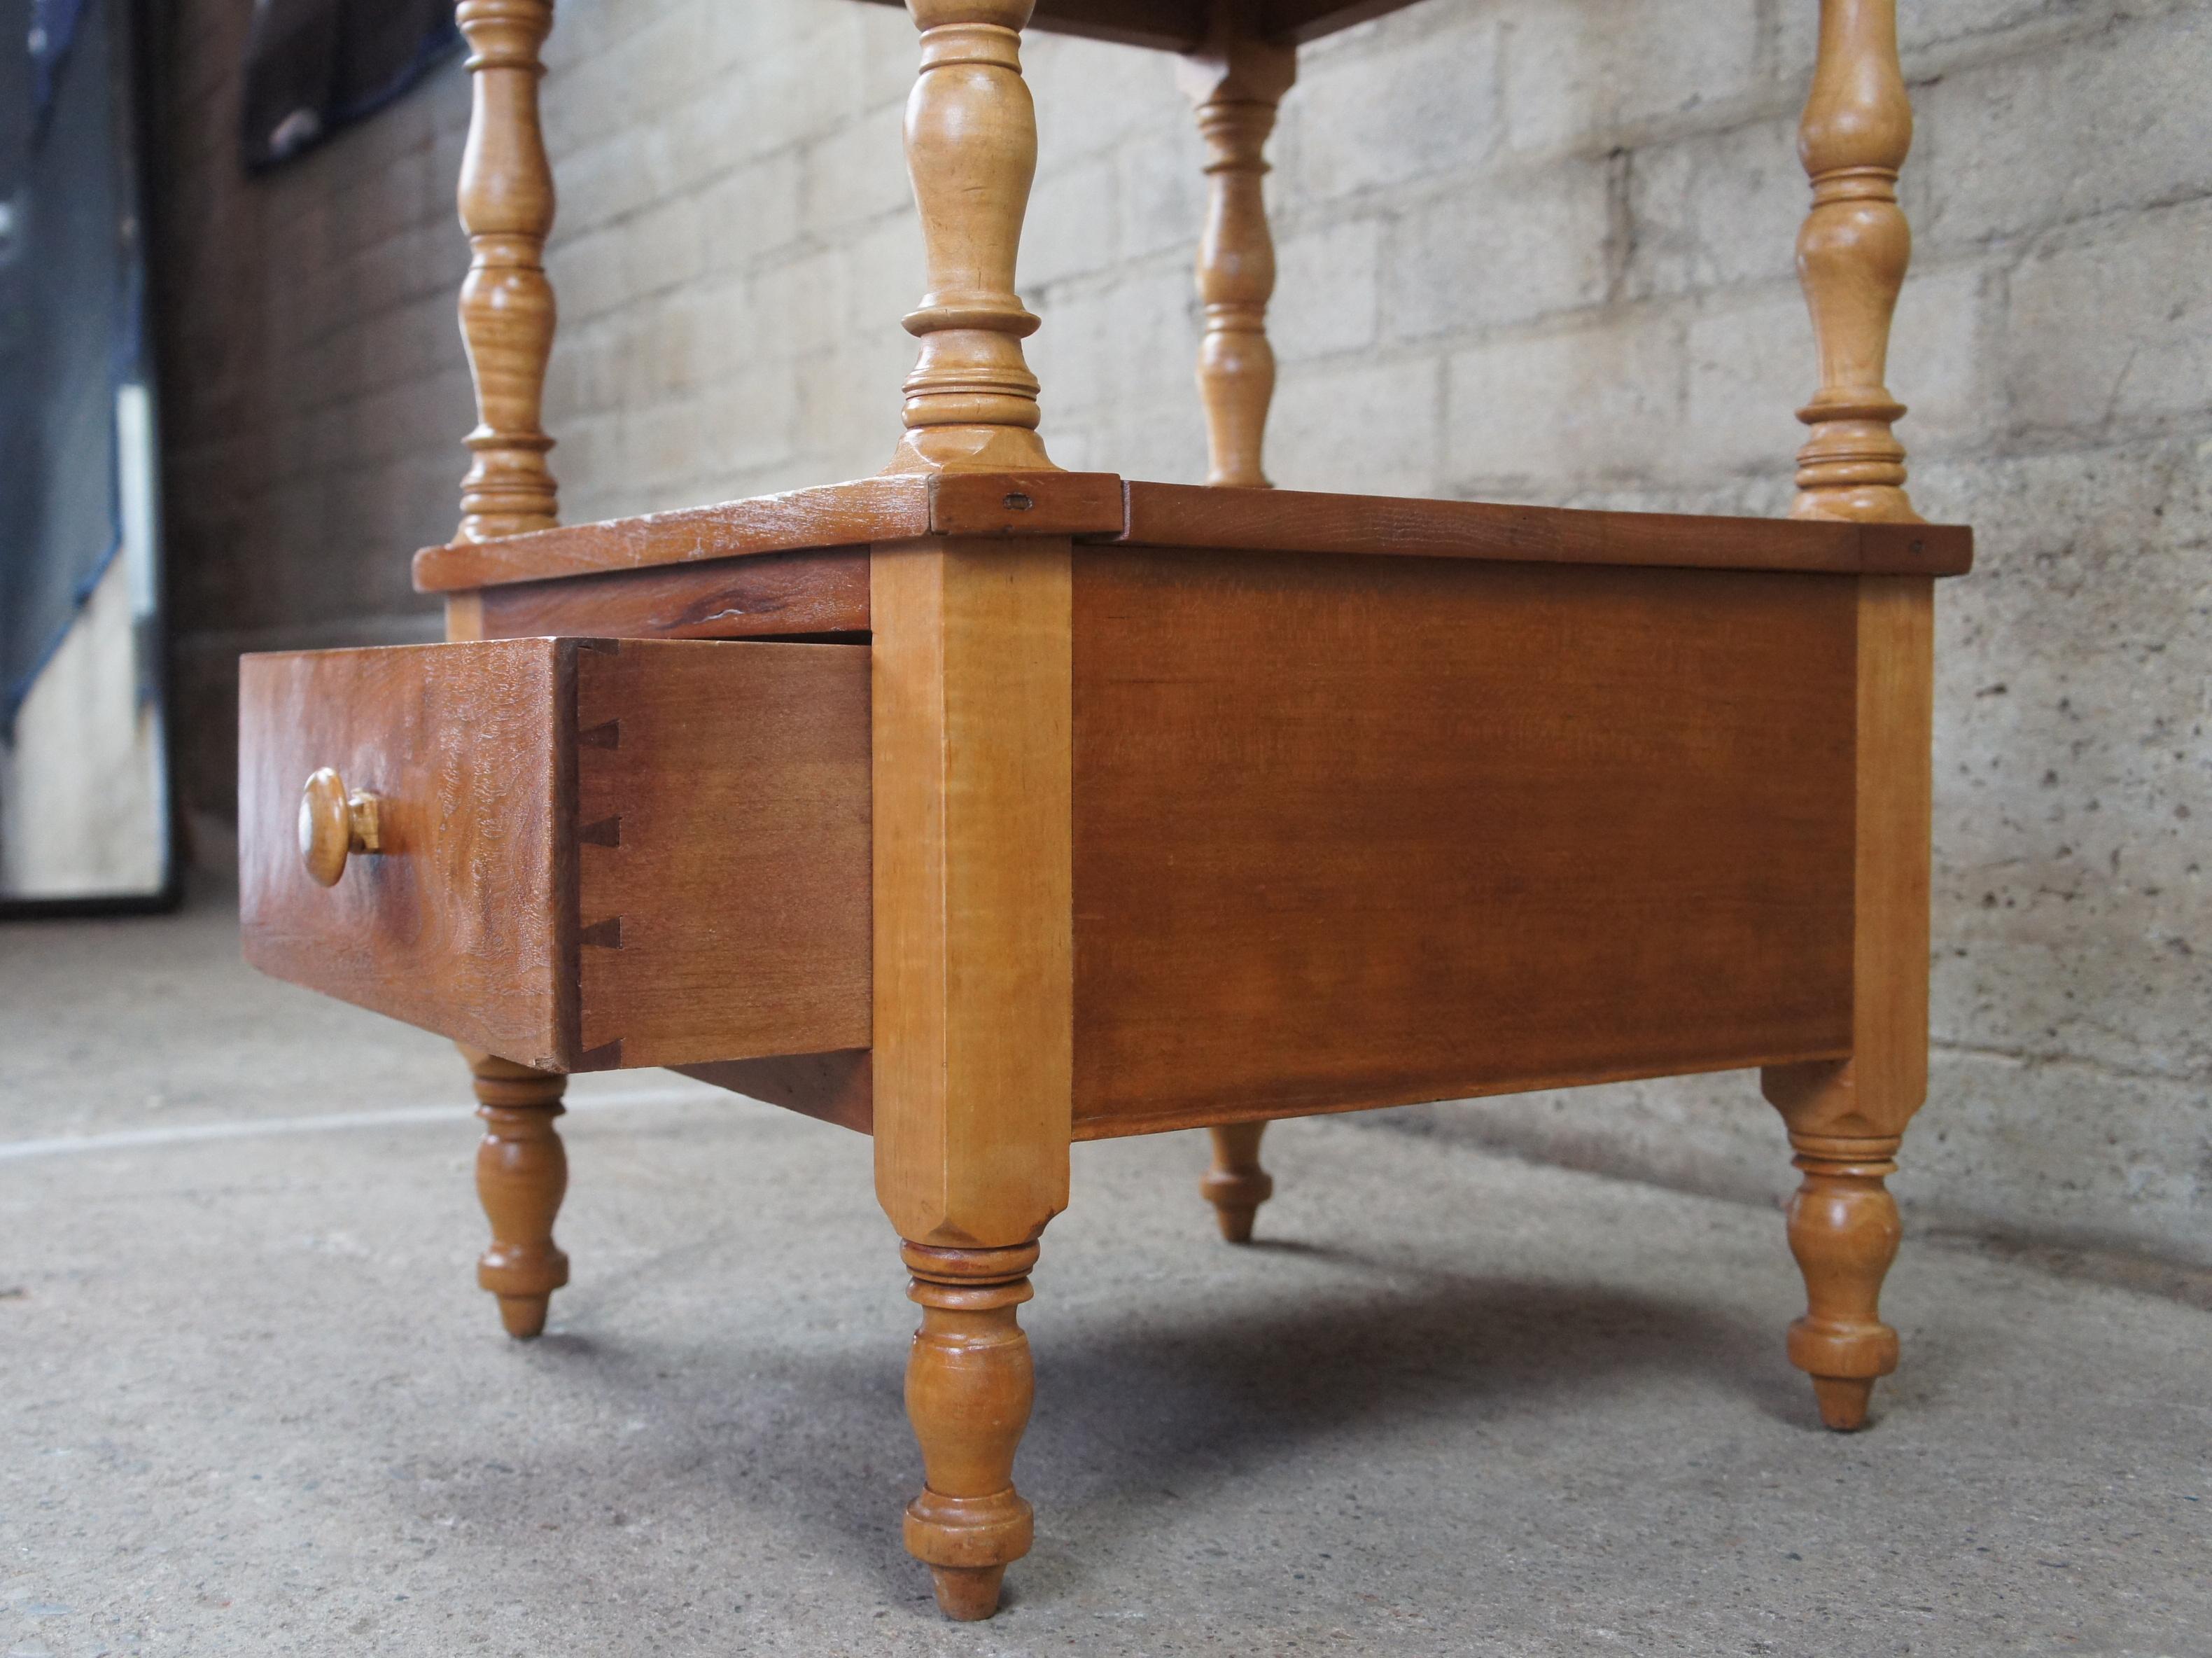 20th Century Early American Maple & Cherry Two Tier Side Accent Table Dry Sink Washstand For Sale